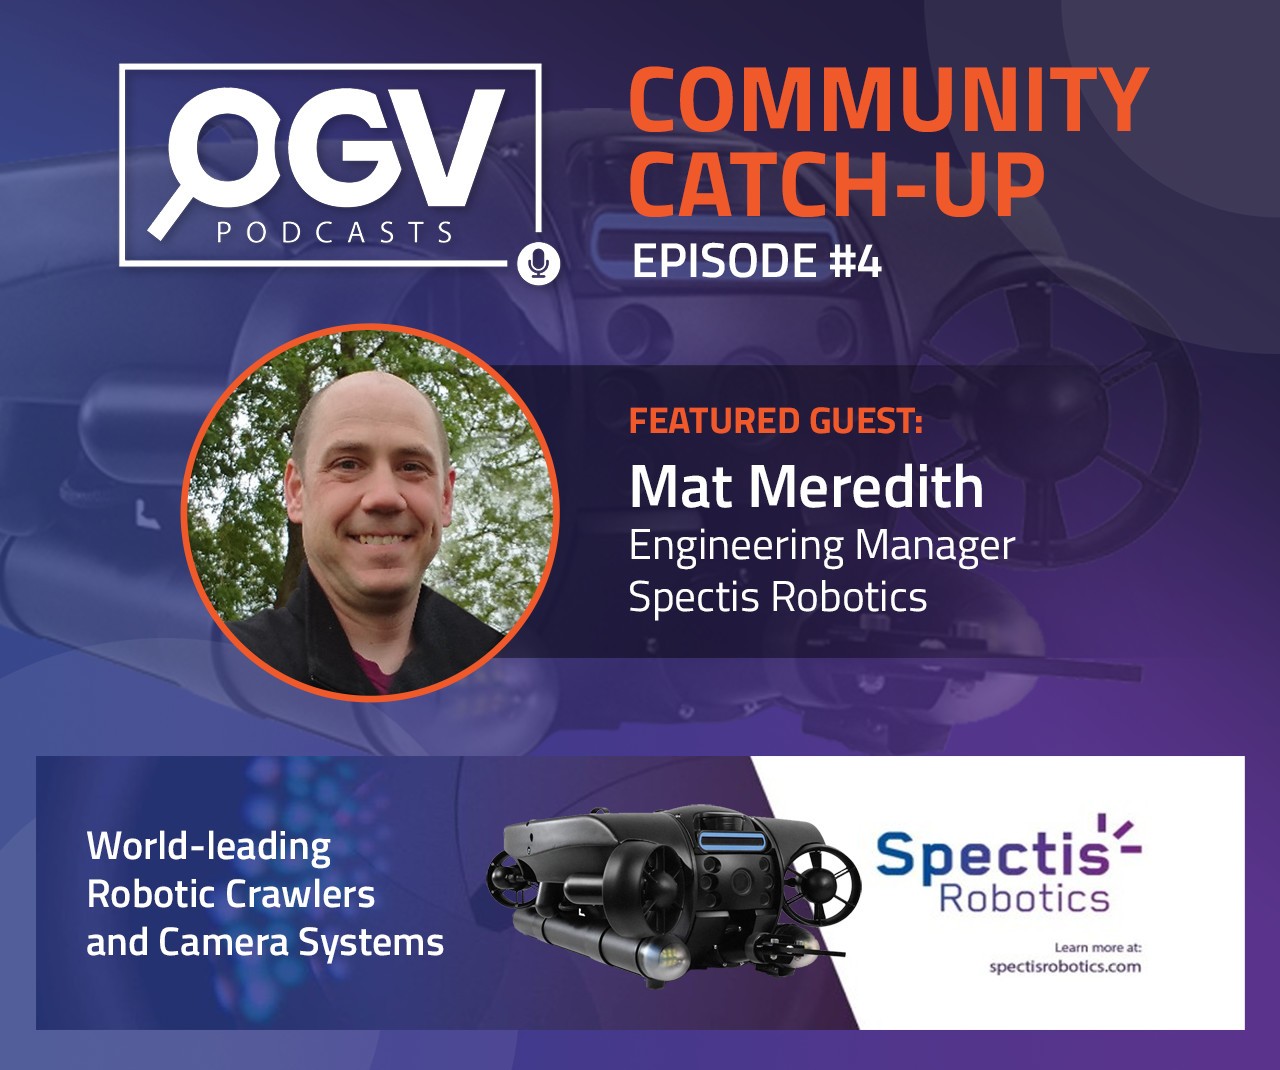 OGV Community Catch-up with Mat Meredith from Spectis Robotics